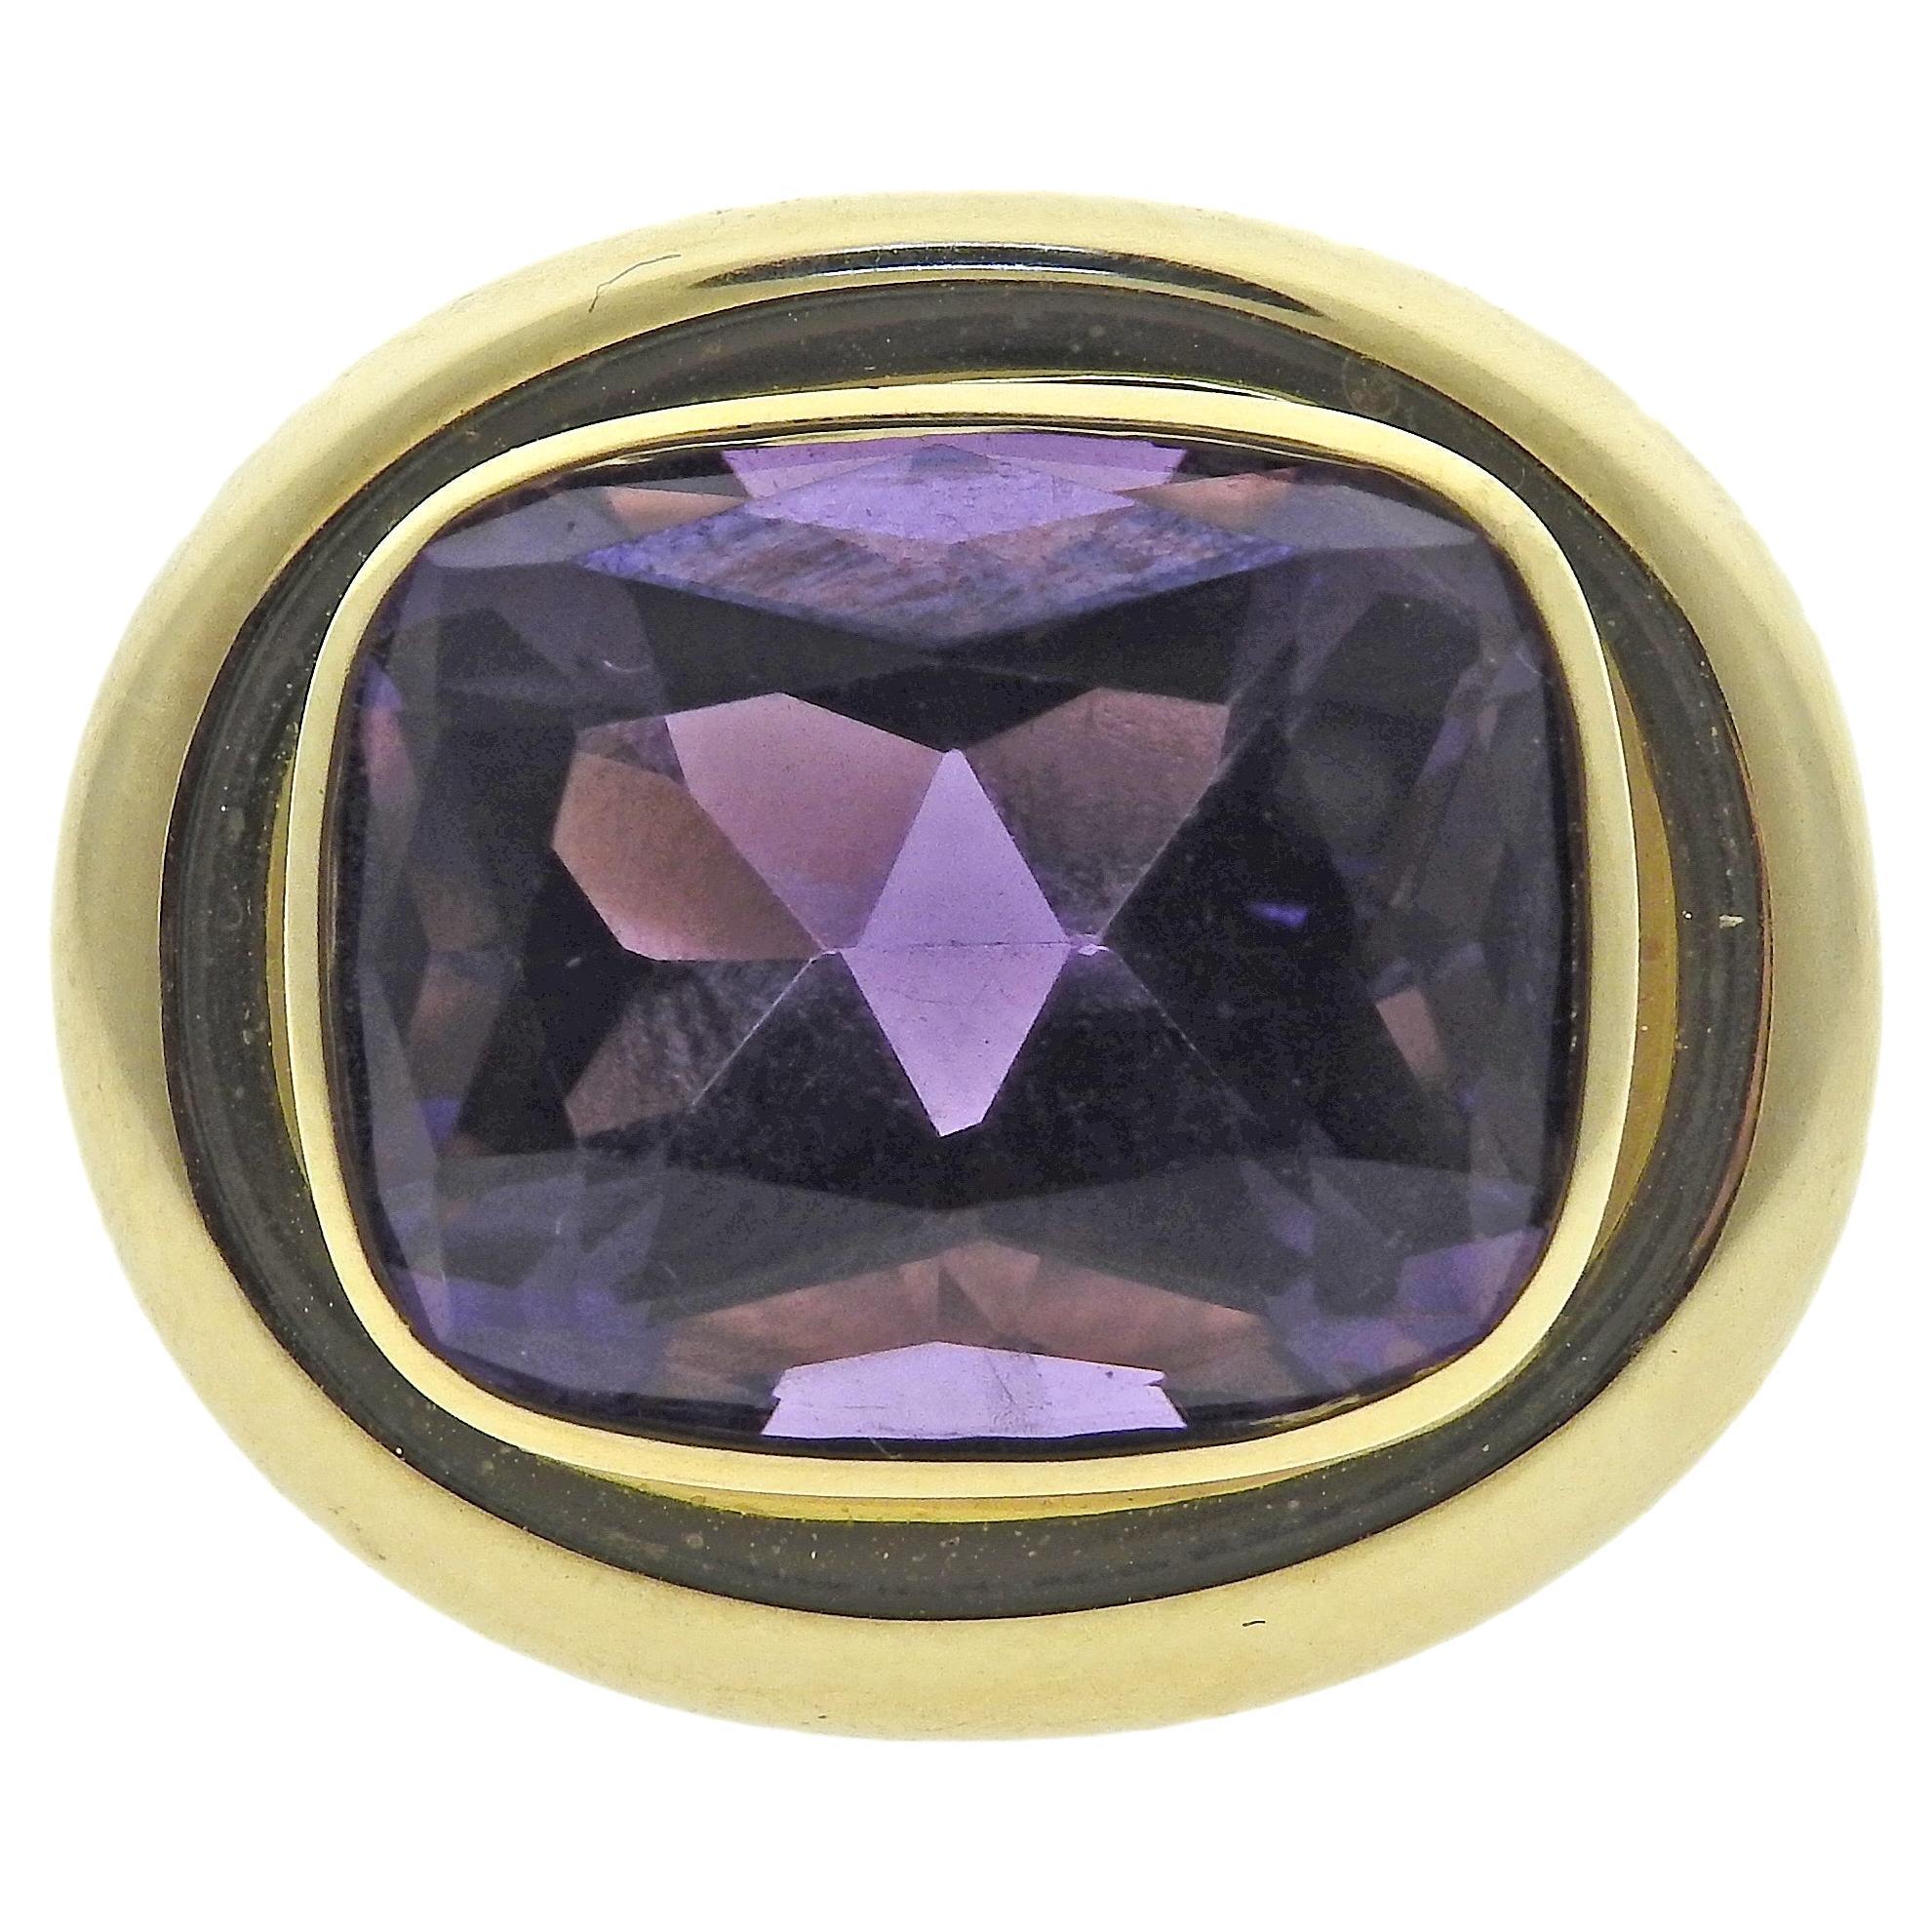 Tiffany & Co by Paloma Picasso 18k yellow gold large 18.5mm x 16.5mm amethyst ring. Ring size is 6.5, top measures 27mm x 24mm. Marked: Tiffany & Co, 750, Paloma Picasso. Weight is 29.2 grams.